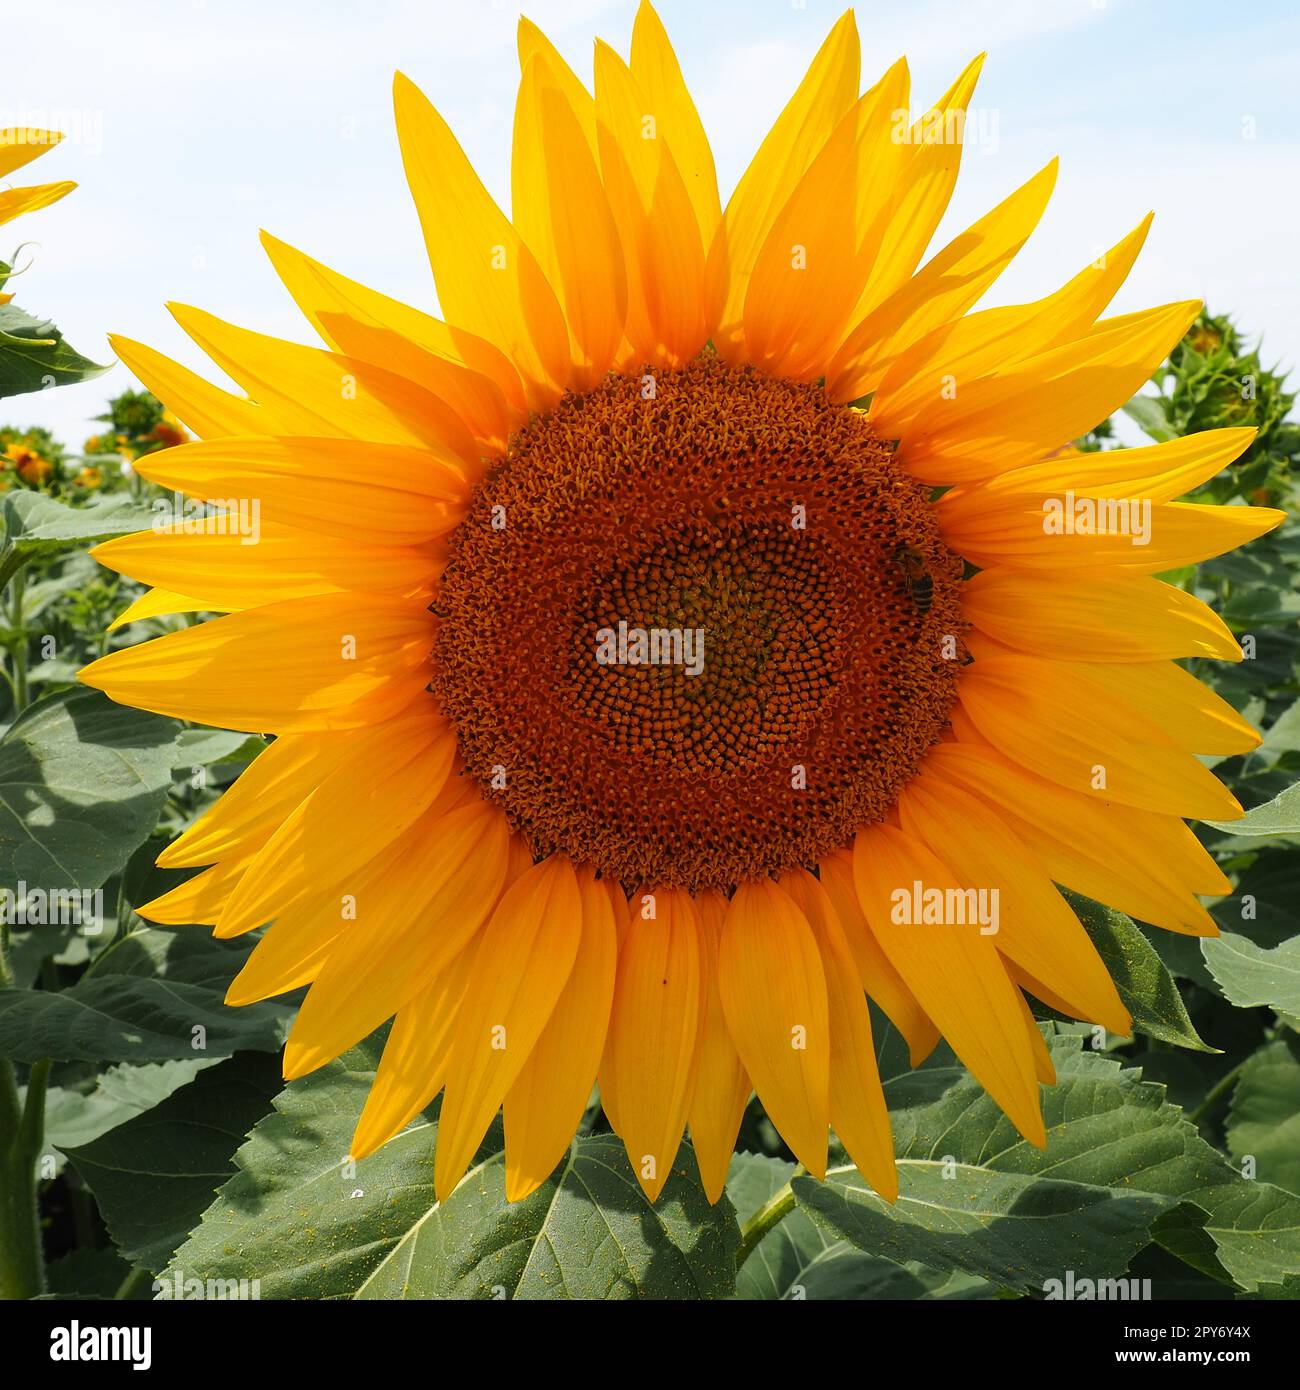 The Helianthus sunflower is a genus of plants in the Asteraceae family. Annual sunflower and tuberous sunflower. Agricultural field. Blooming bud with yellow petals. Furry leaves One big flower. Stock Photo